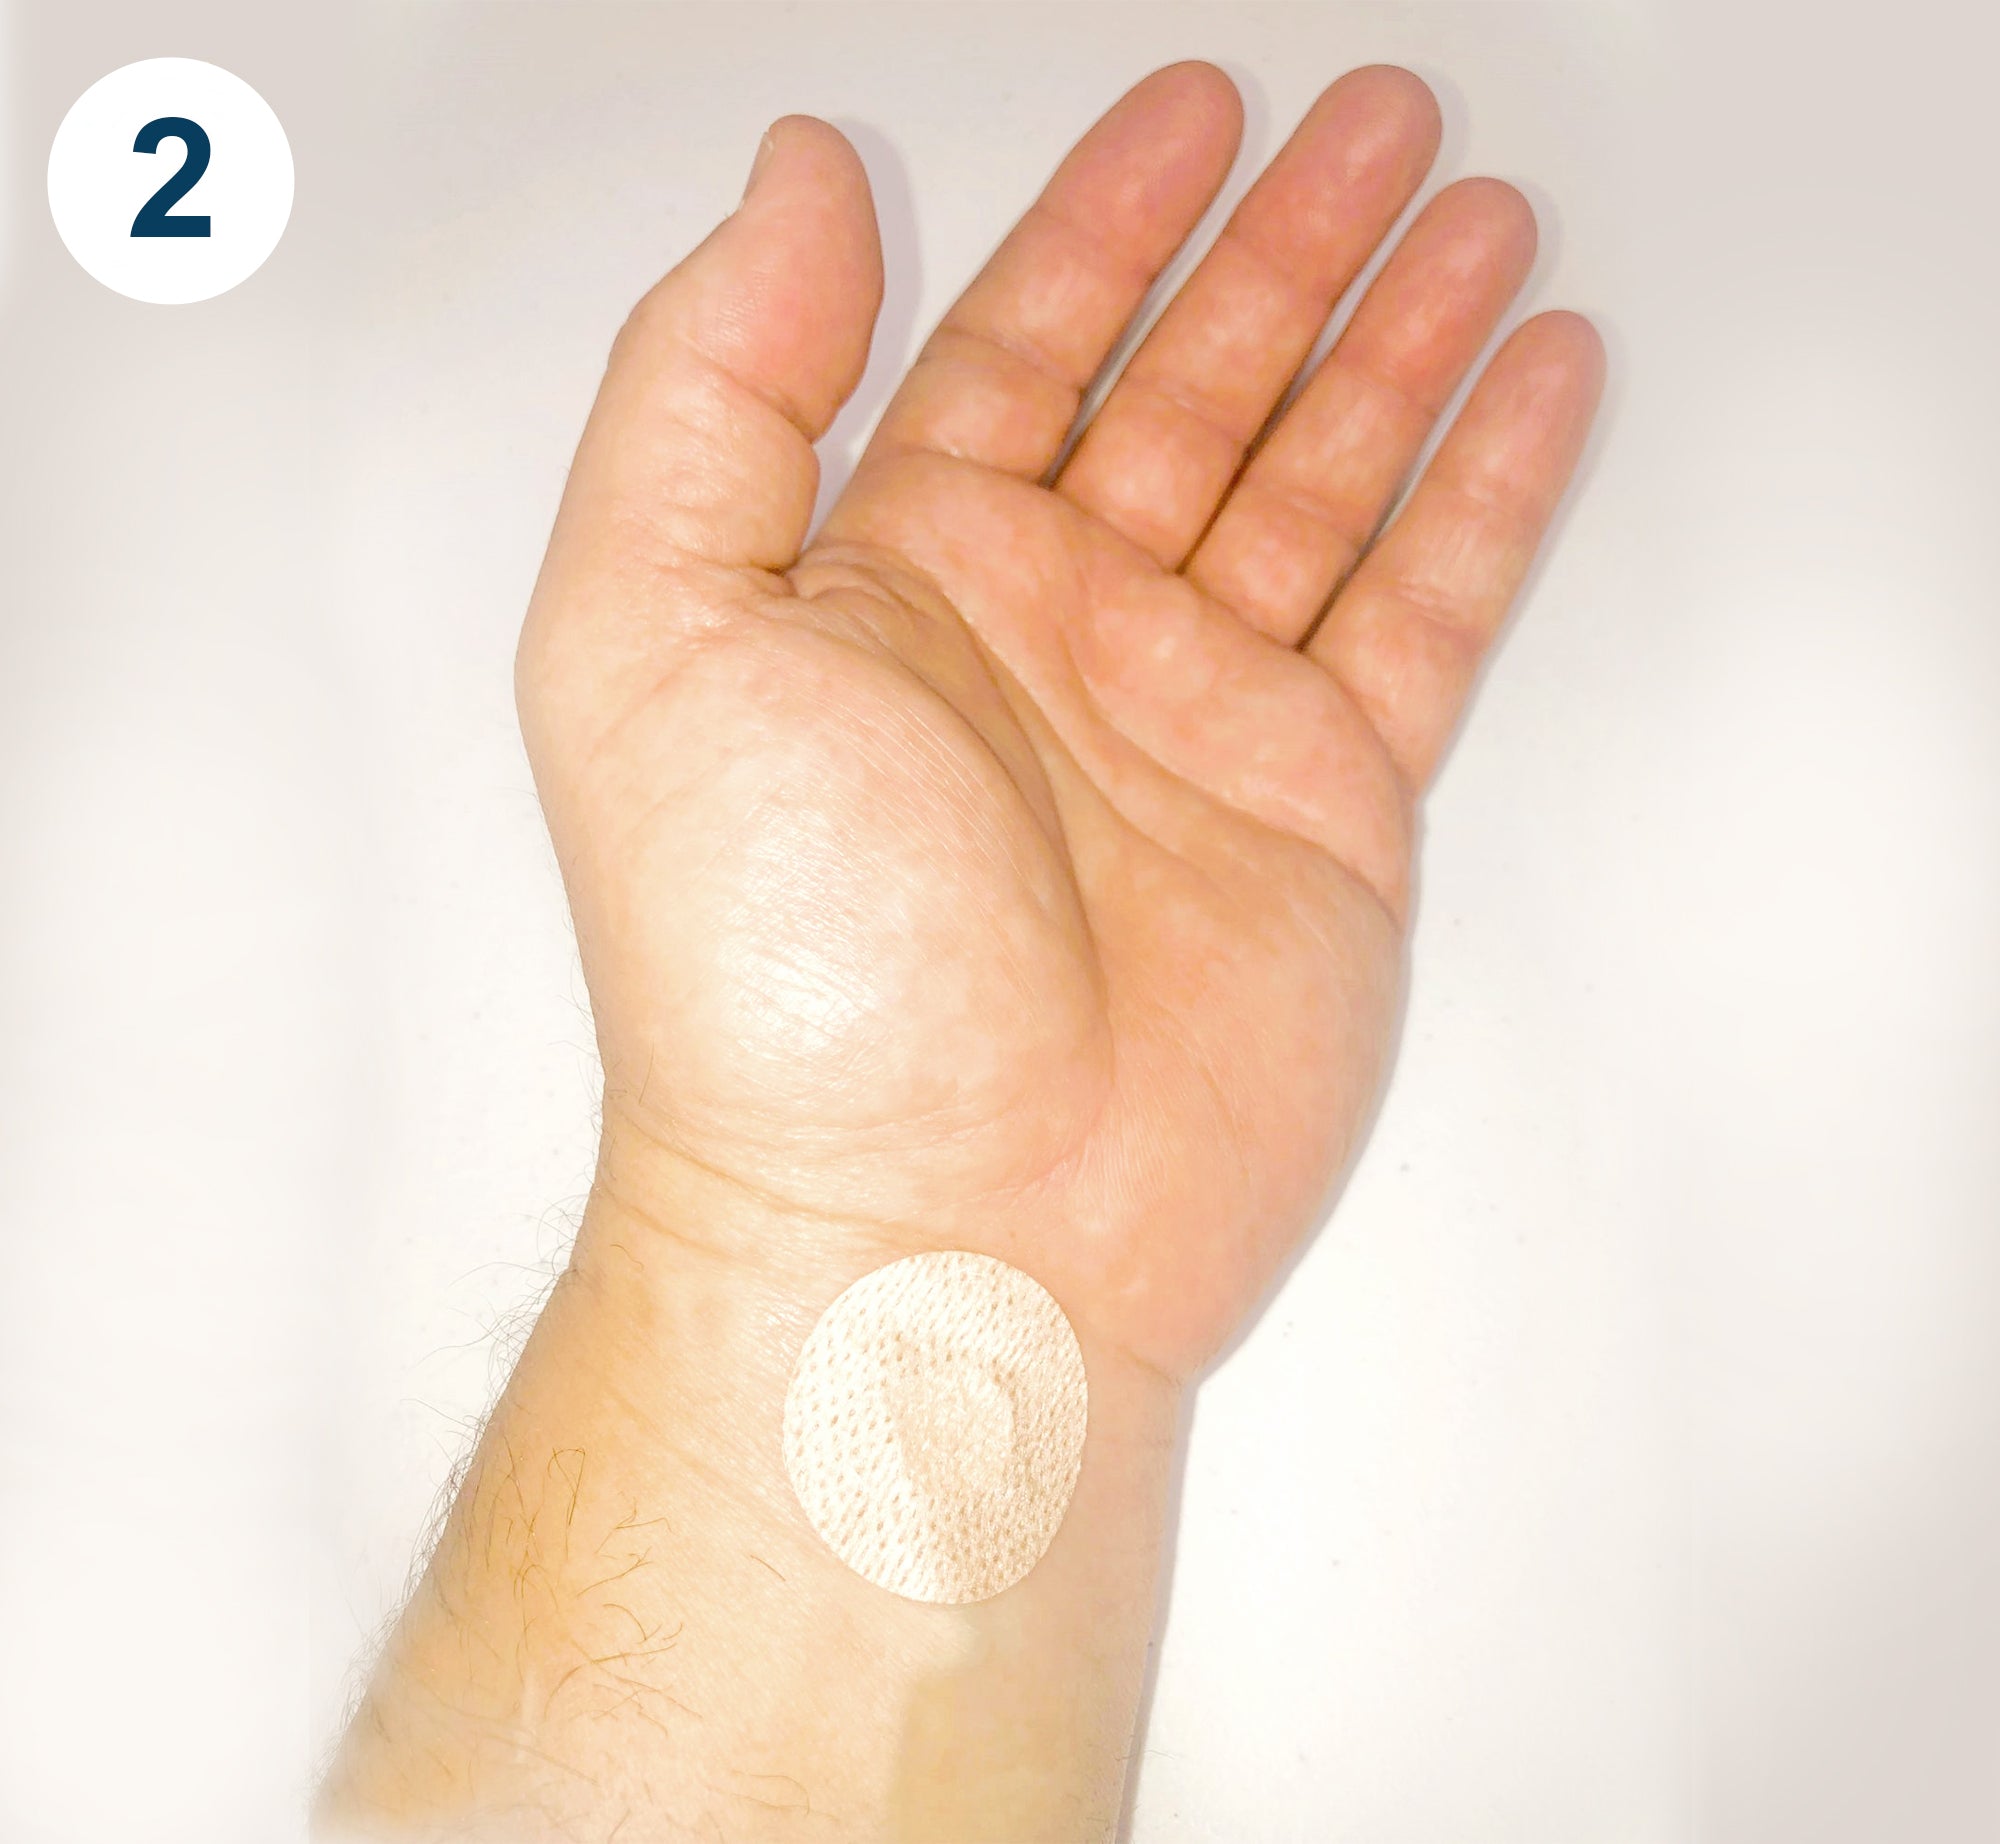 apply patch to the upper left wrist 30-60 minutes before sleeping, 